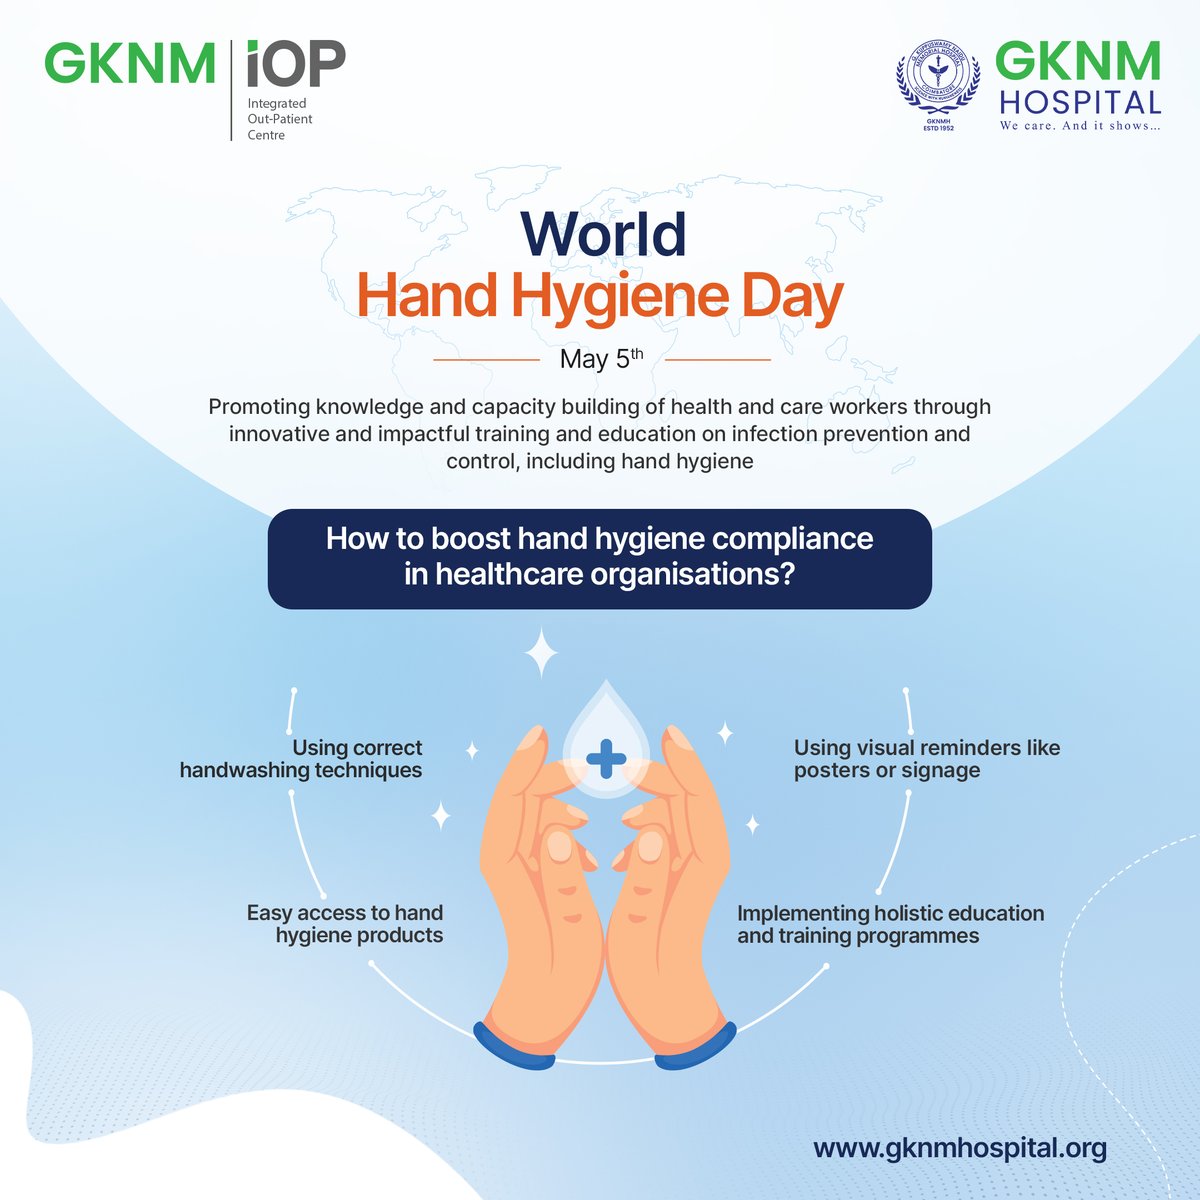 Education and awareness about #handhygiene not only reinforces a culture of safety but also protects both patients and staff from healthcare associated infections. #WorldHandHygieneDay #HandHygieneDay #CleanYourHands #HandWash #InfectionFree #GKNM #GKNMH #GKNMIOP #GKNMHospital